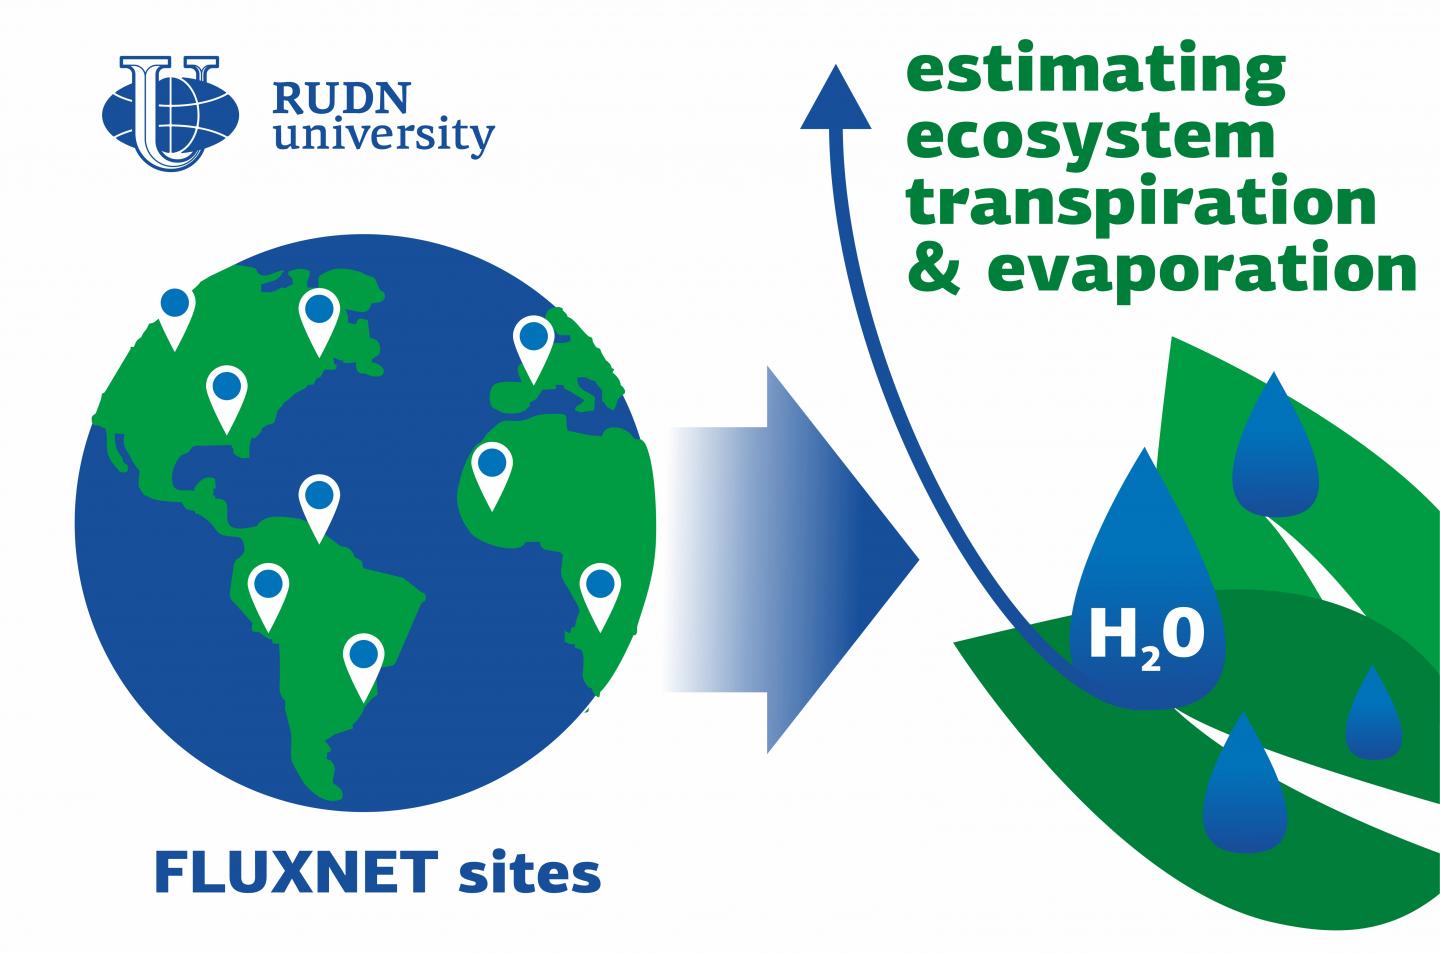 Ecologist from RUDN University contributed to a novel study on vegetation transpiration from a global network of  251 sites